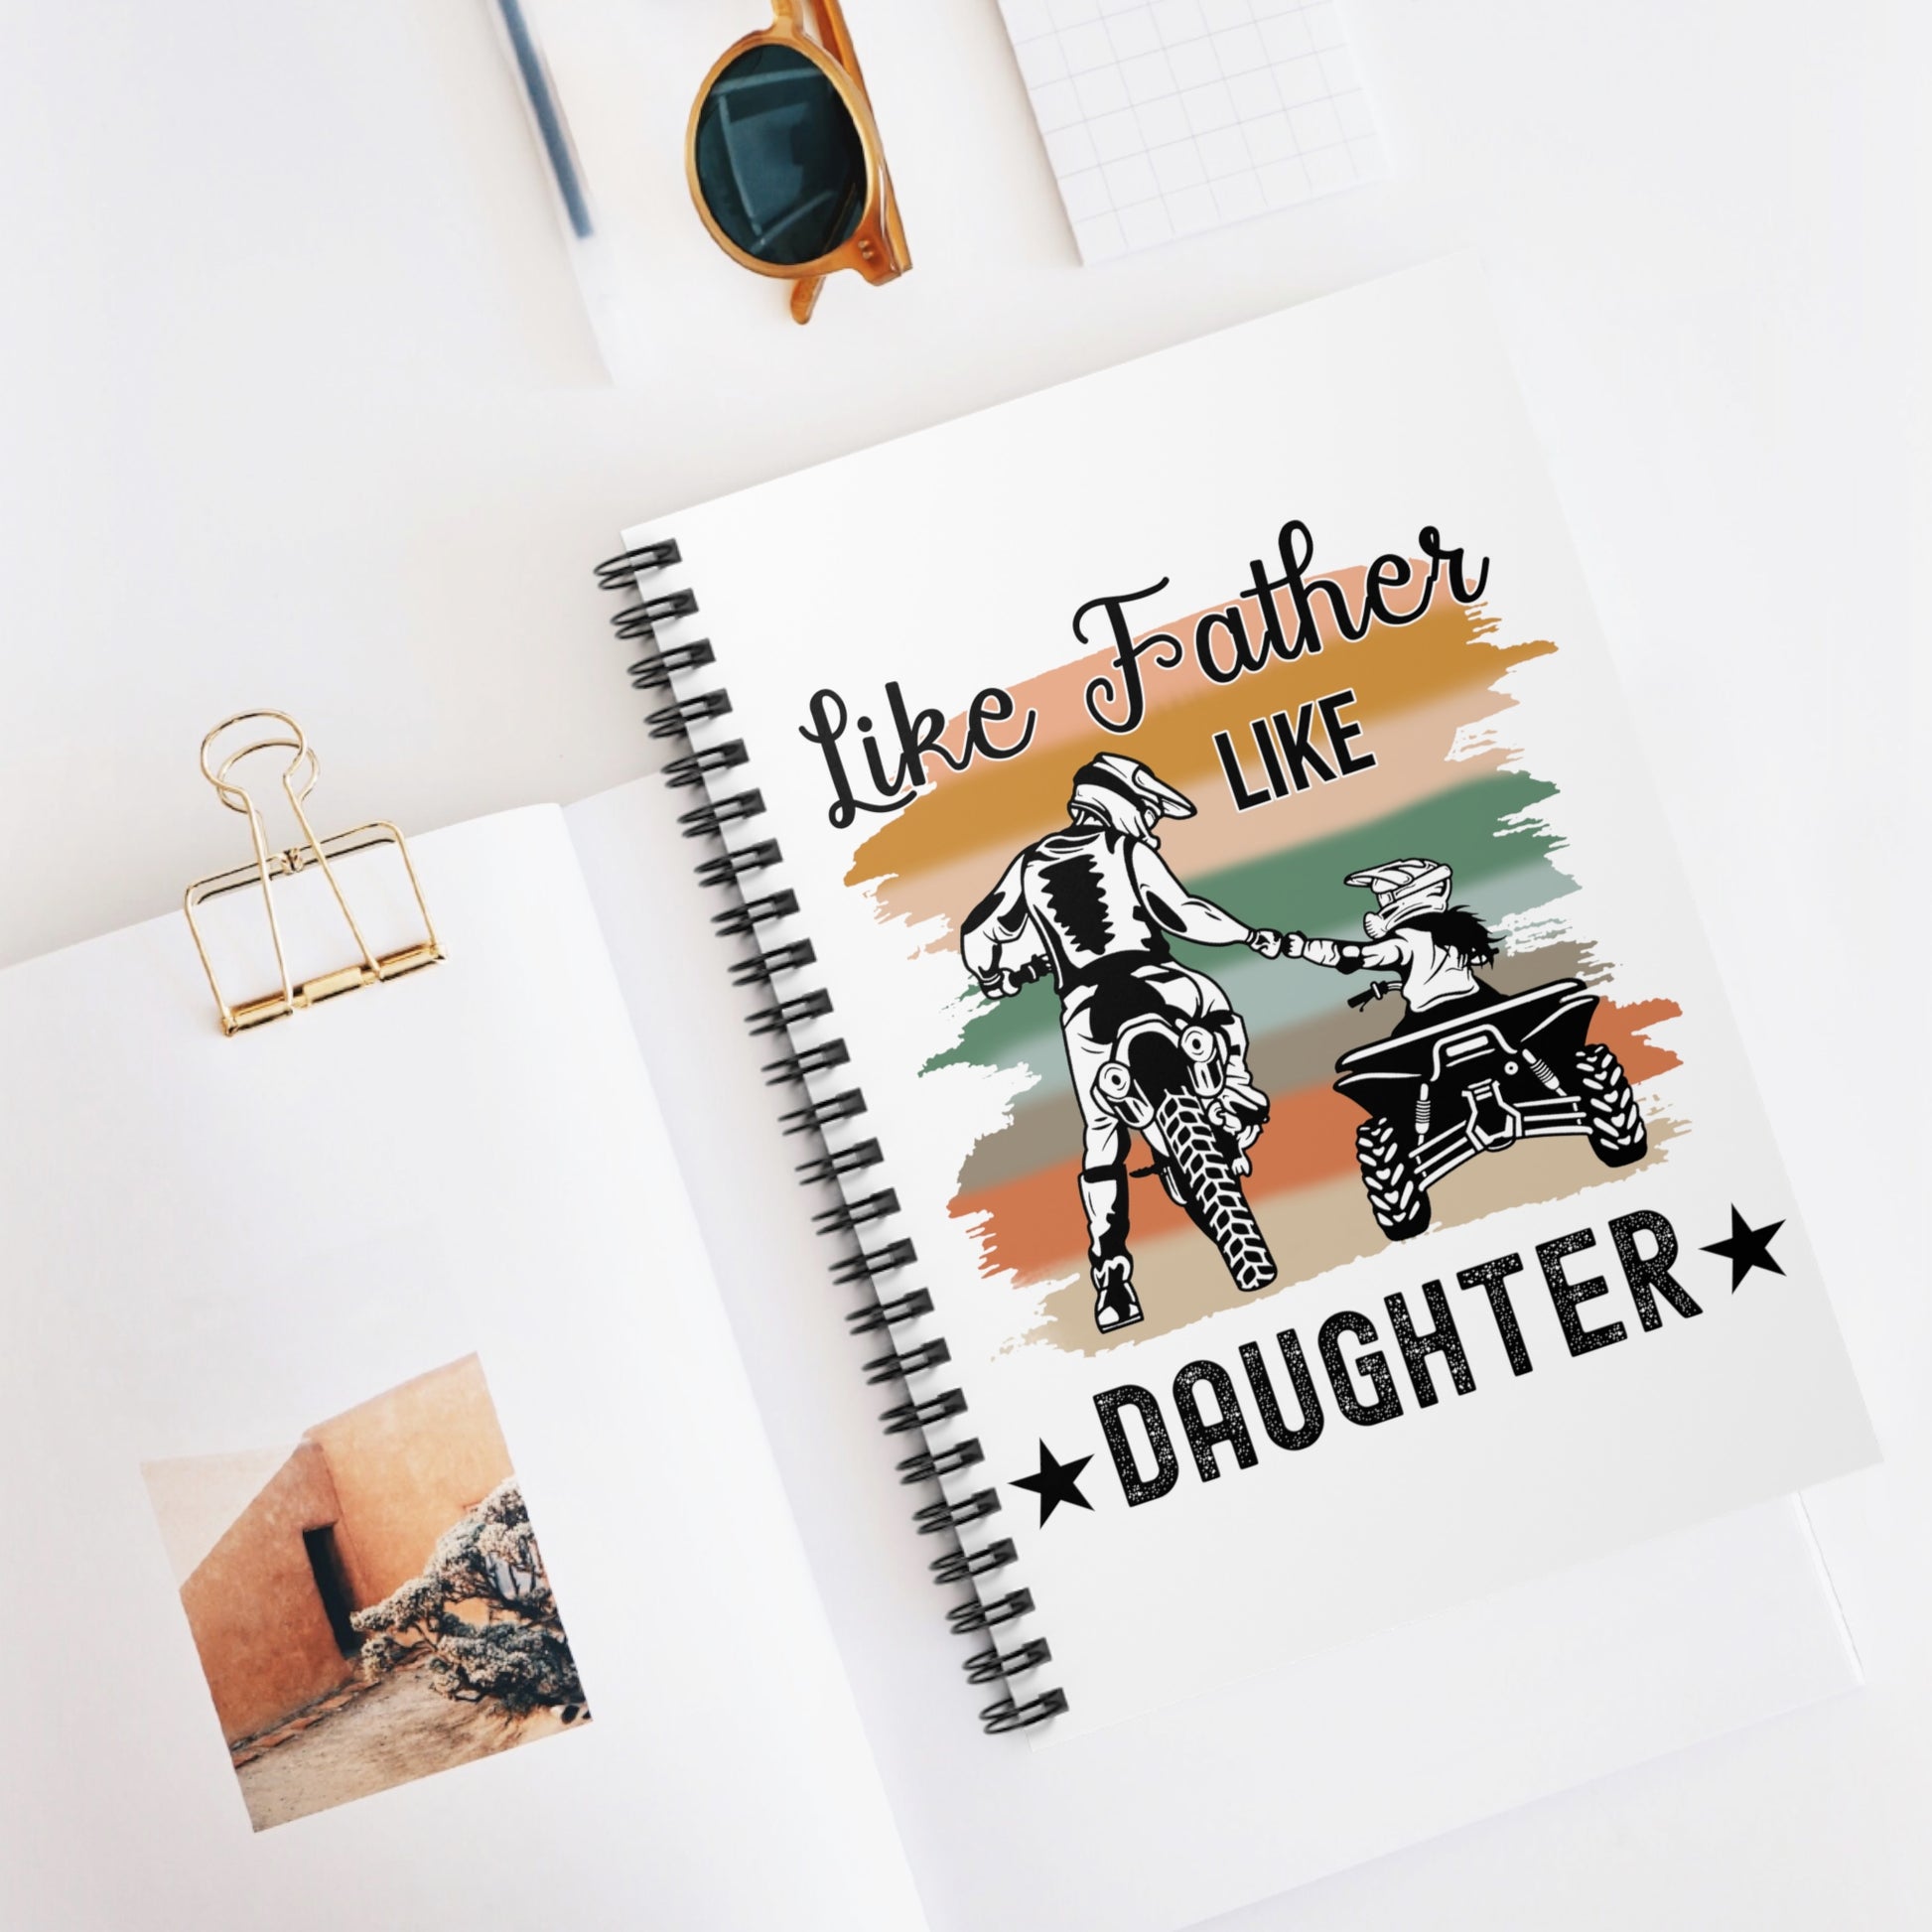 Like Father Like Daughter: Spiral Notebook - Log Books - Journals - Diaries - and More Custom Printed by TheGlassyLass